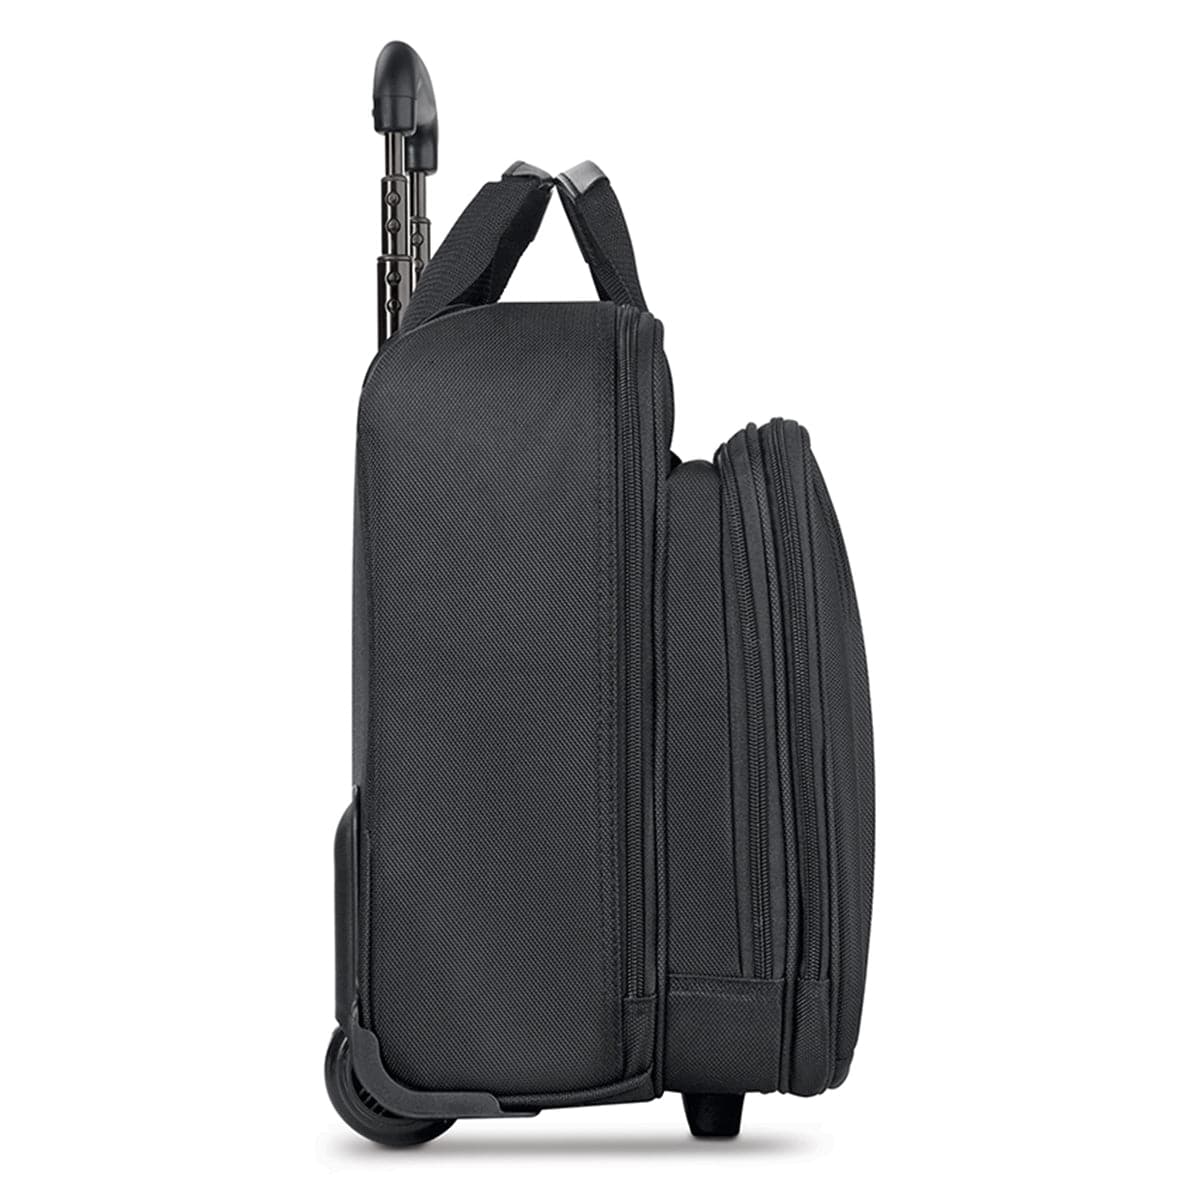 Solo Midtown Bryant Rolling Case